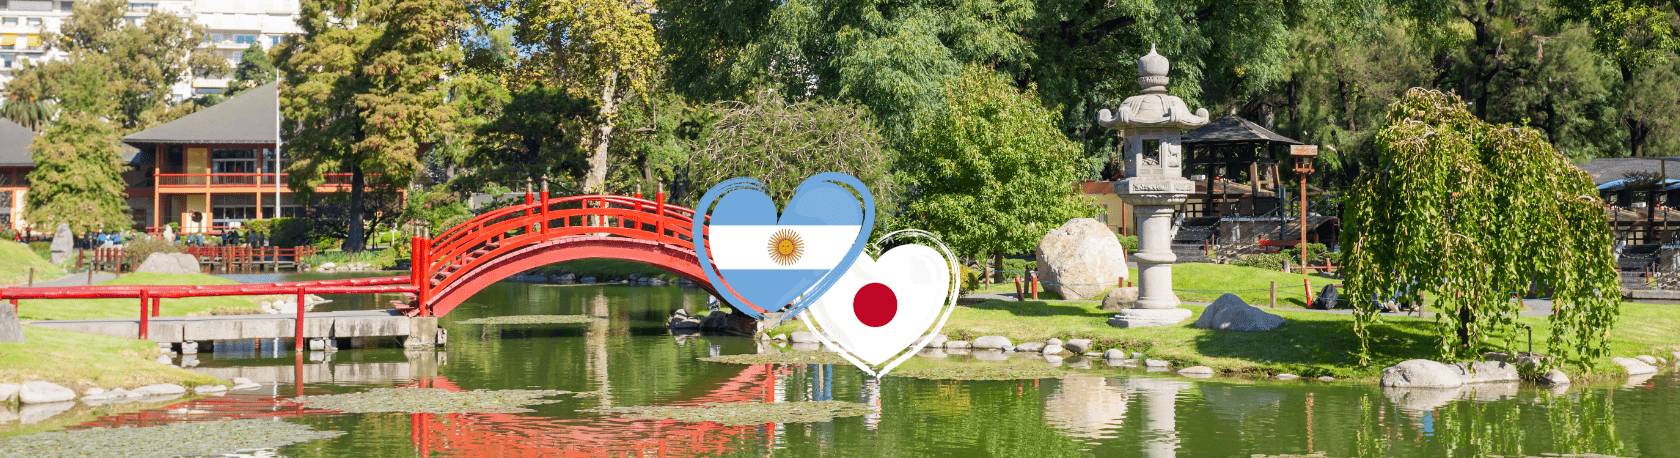 Polish up your Spanish vocabulary and discover the enchanting Japanese Garden in the heart of Buenos Aires